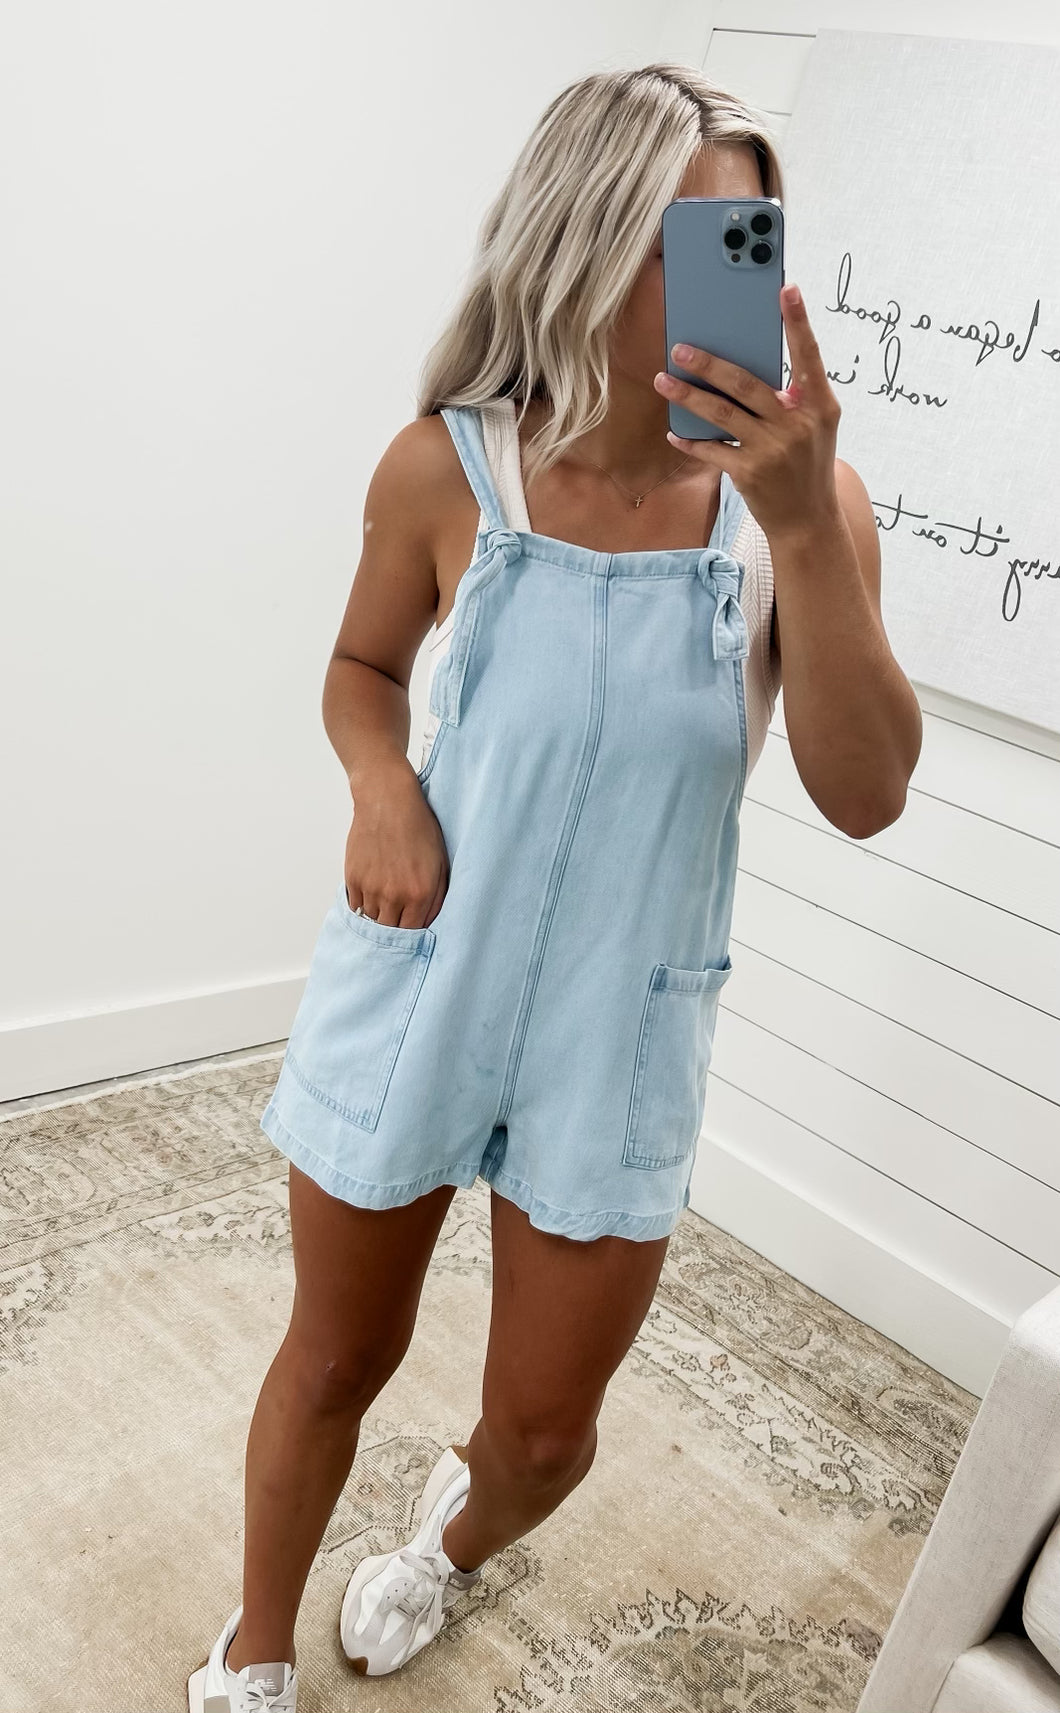 Cute Girl Overalls